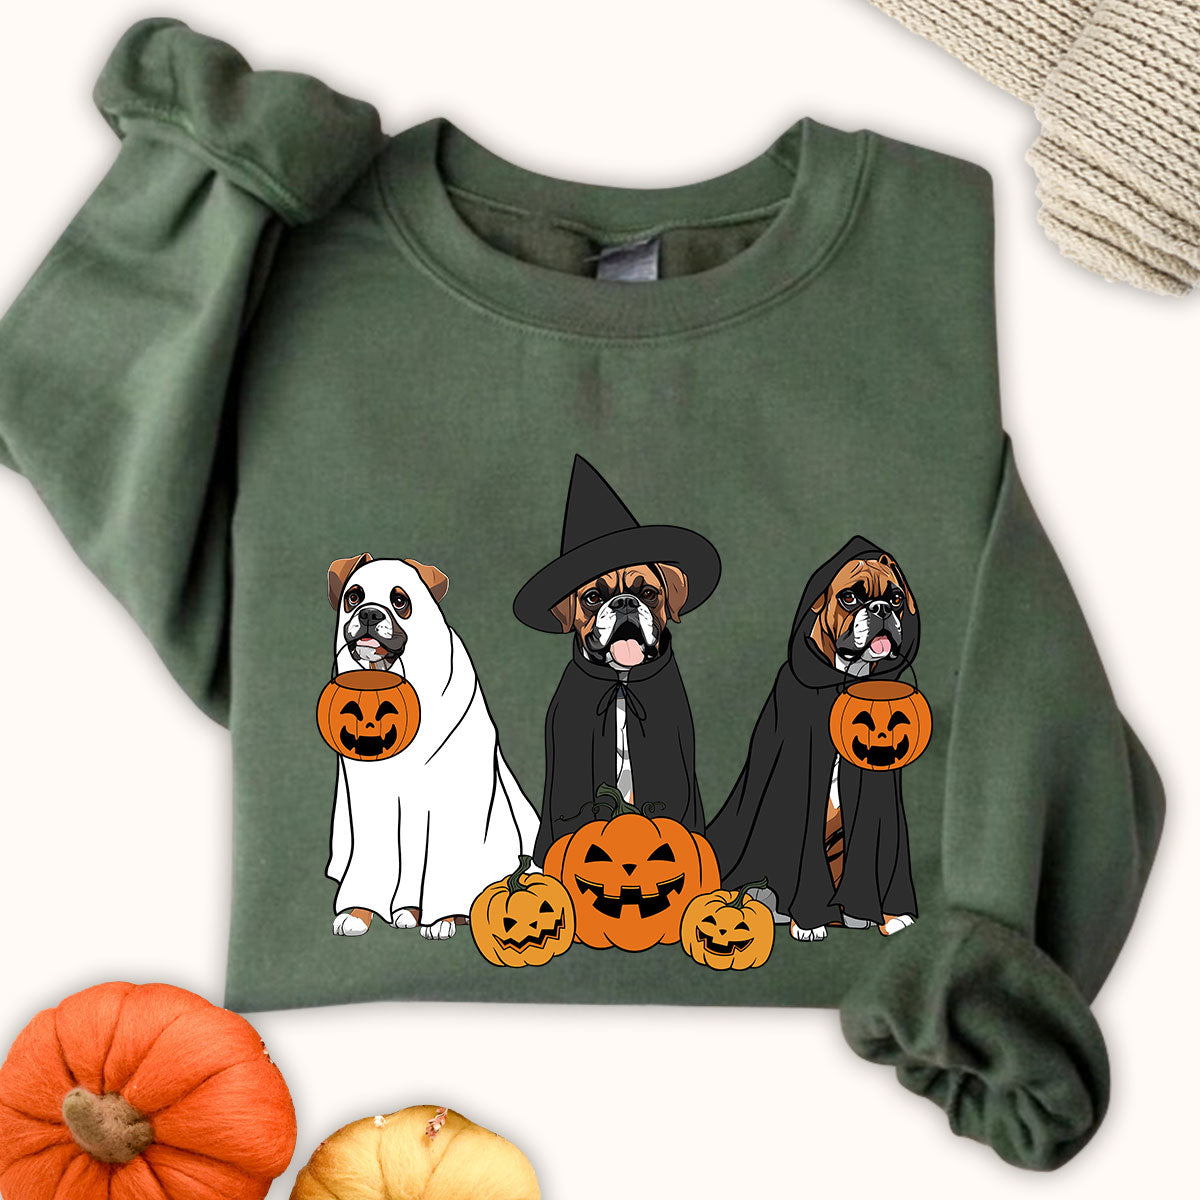 Ghost And Witch Boxer Sweatshirt, Ghost Boxer Shirt, Witch Boxer Shirt, Boxer Halloween Sweatshirt